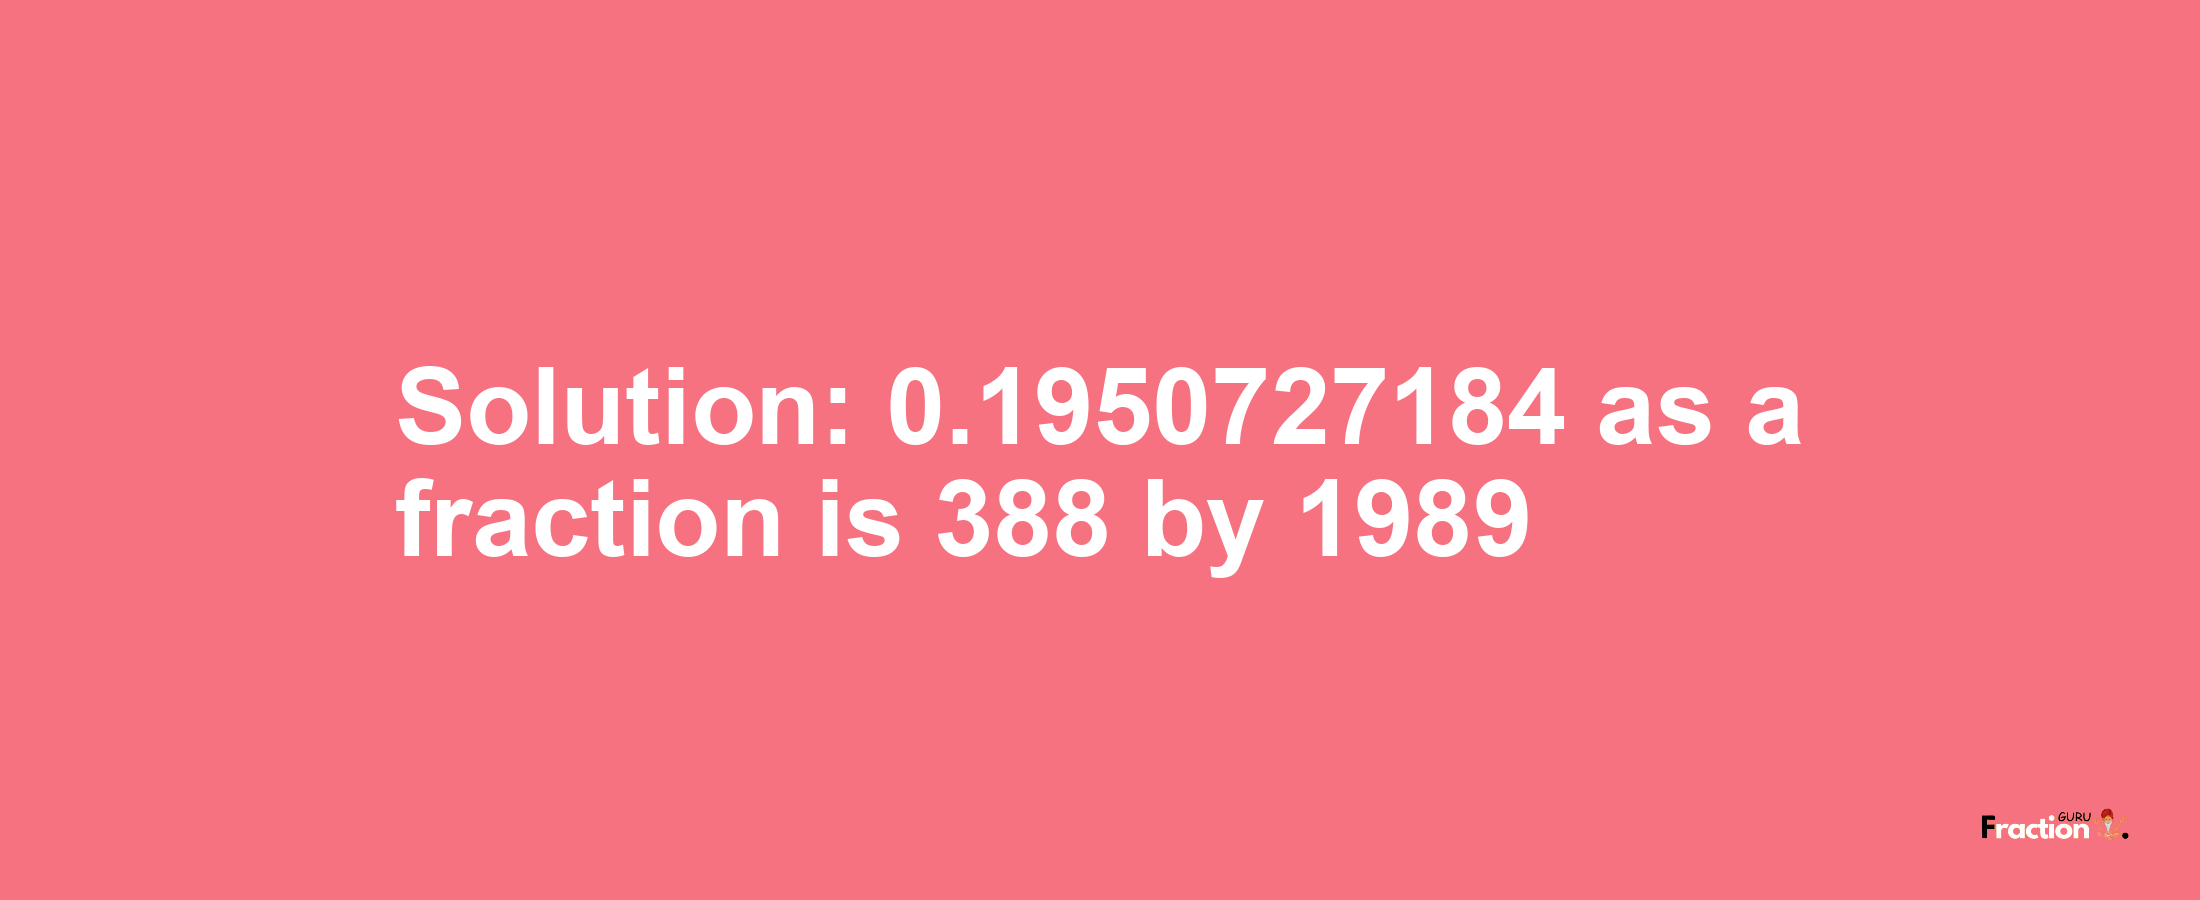 Solution:0.1950727184 as a fraction is 388/1989